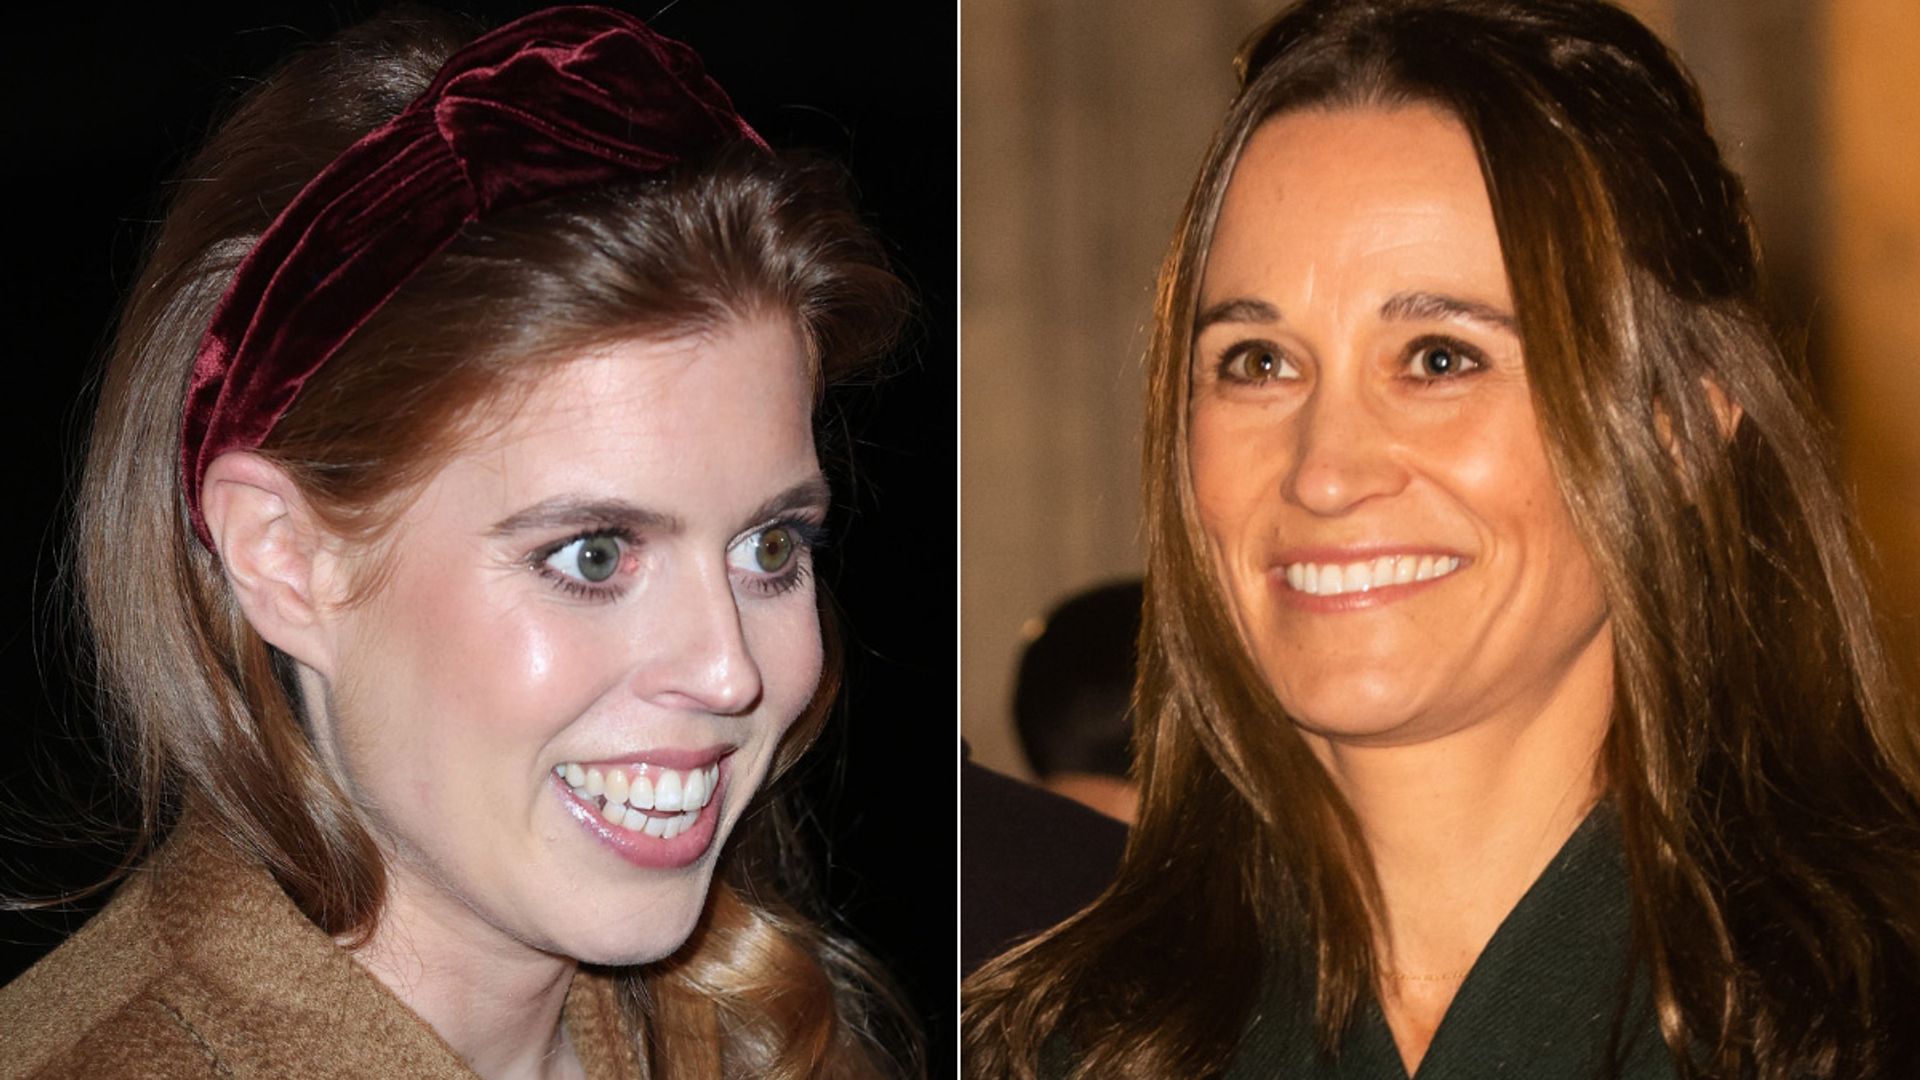 Princess Beatrice and Pippa Middleton unexpectedly twin for royal night out